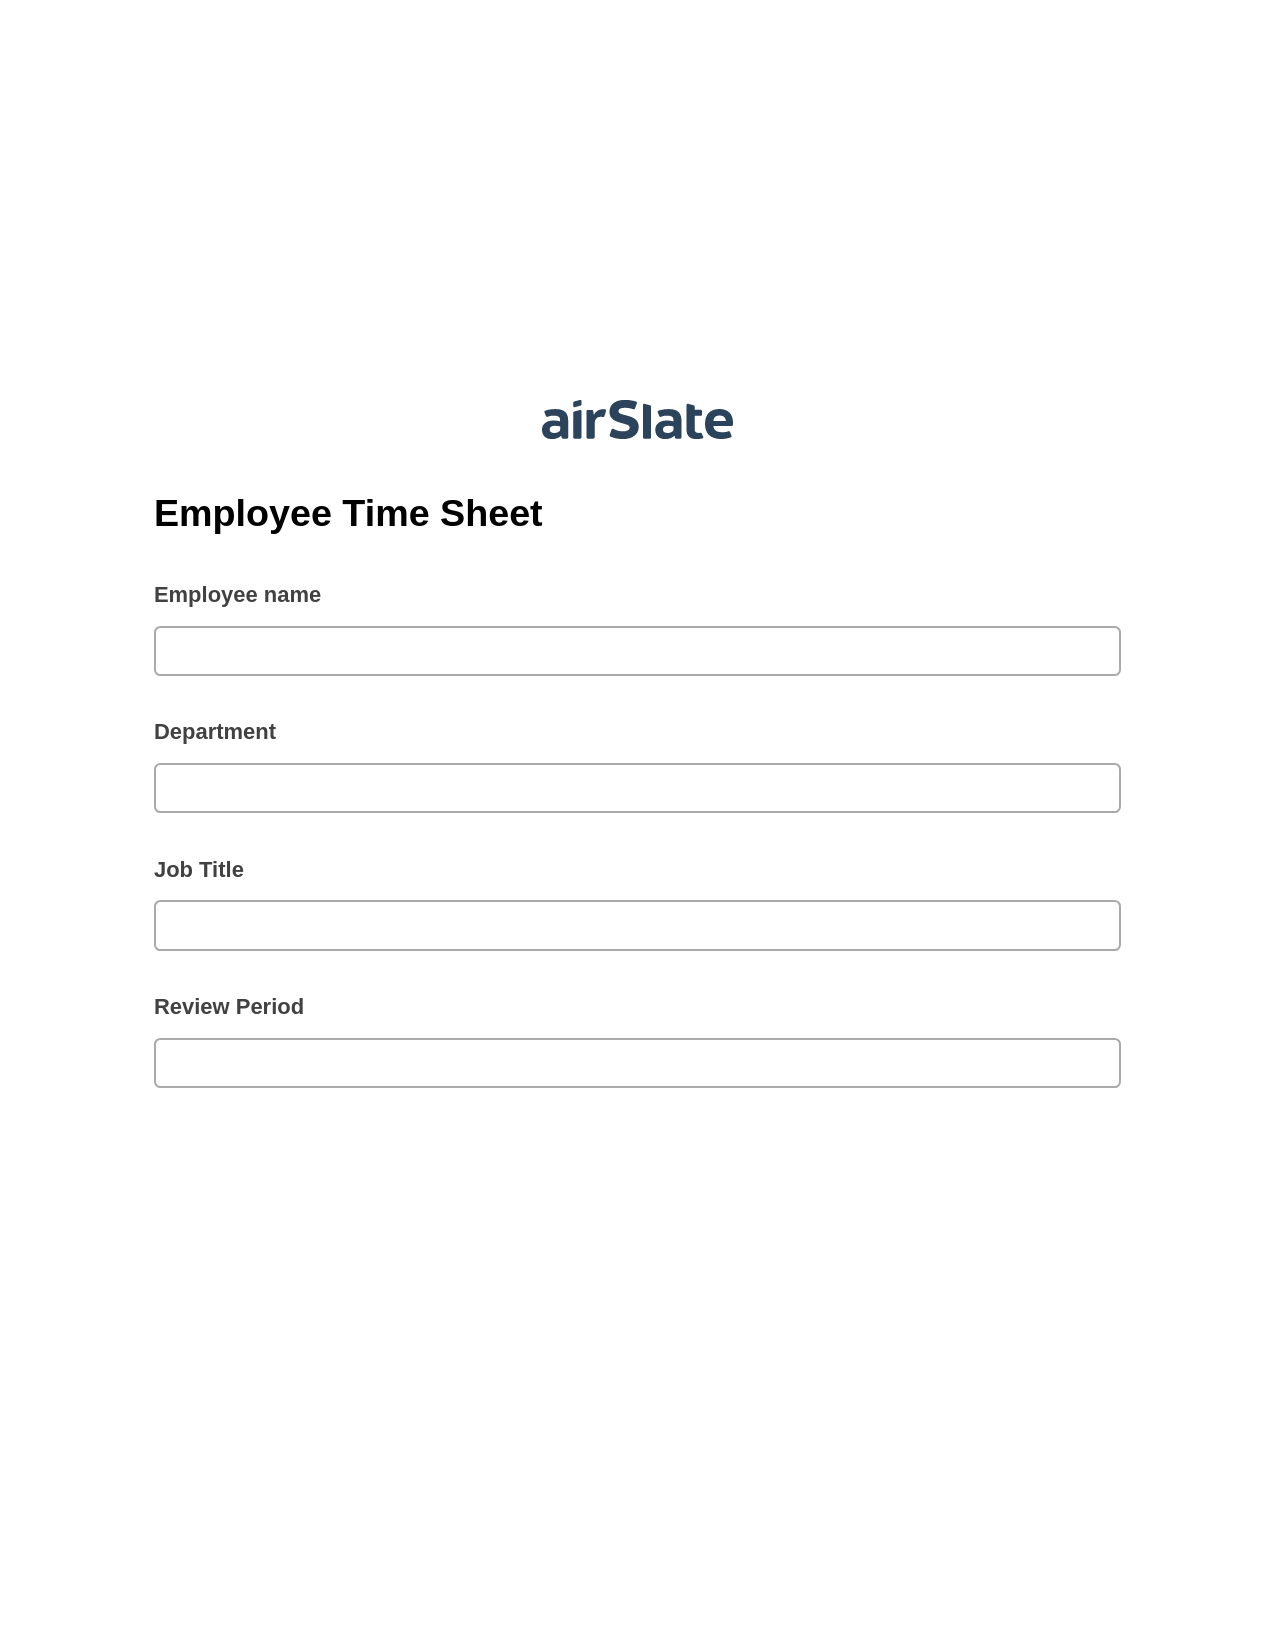 Multirole Employee Time Sheet Pre-fill from AirTable Bot, Create Salesforce Records Bot, Archive to SharePoint Folder Bot